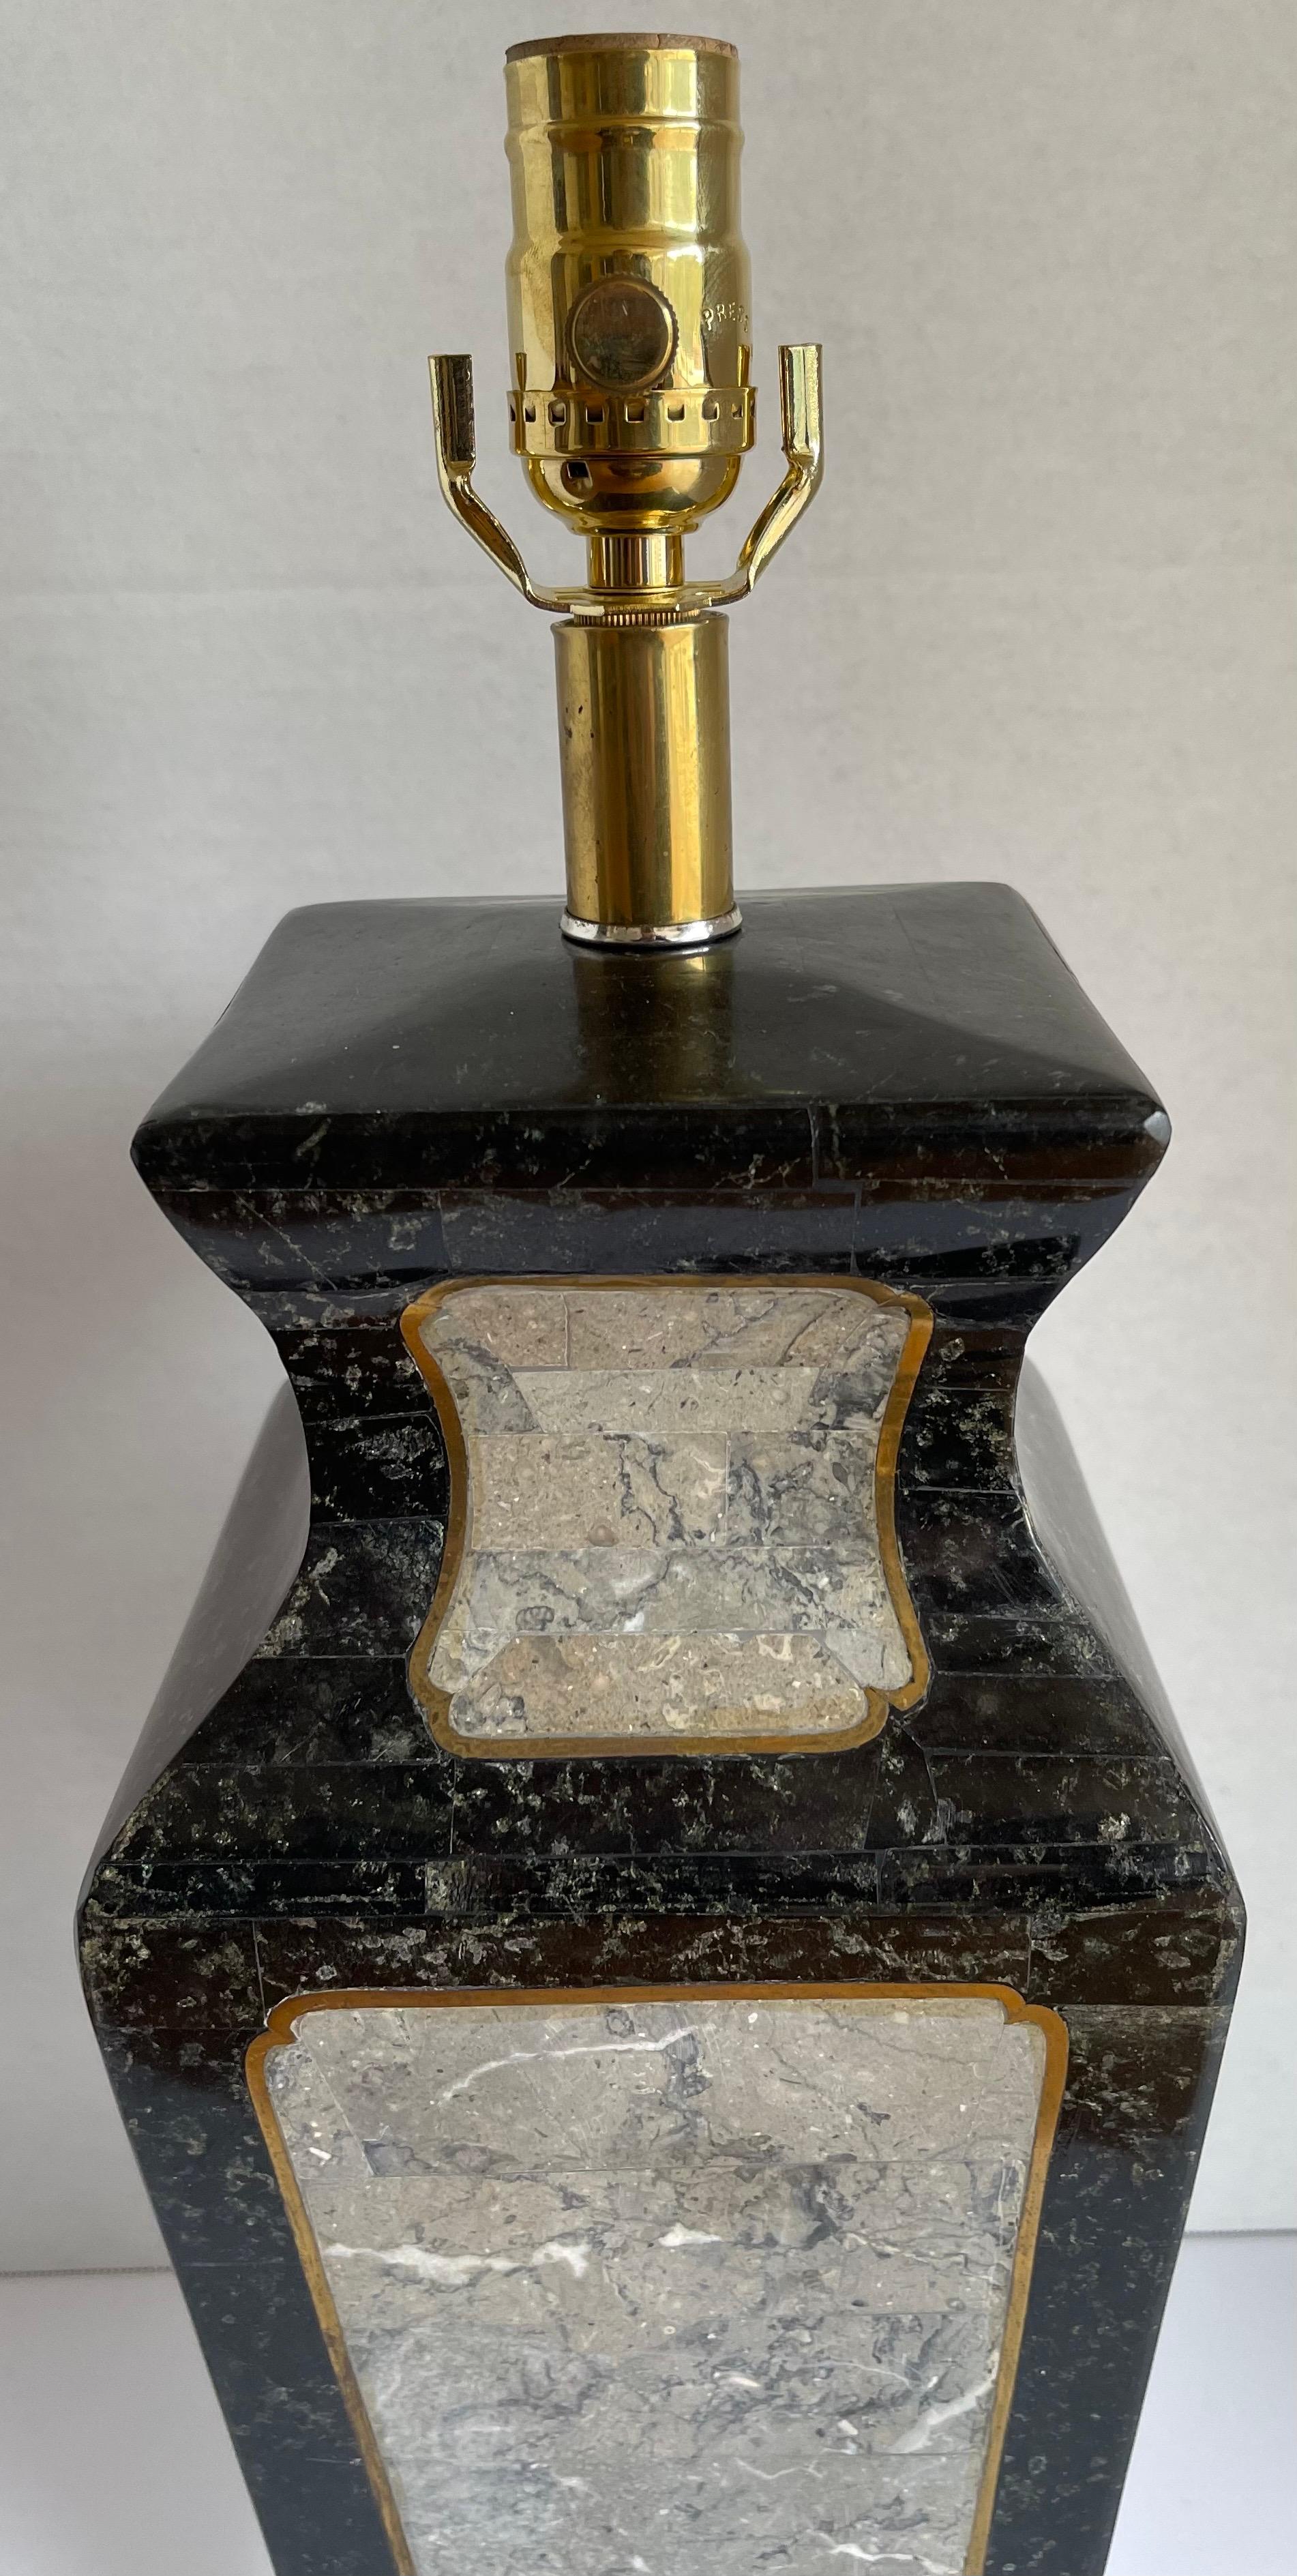 1980s Maitland-Smith stone and brass table lamp. Black and gray stone with brass inlaid detailing. Original square lucite base with beveled edge. Newly rewired with new brass socket. Lamp takes one standard bulb (not included). Lampshade is not